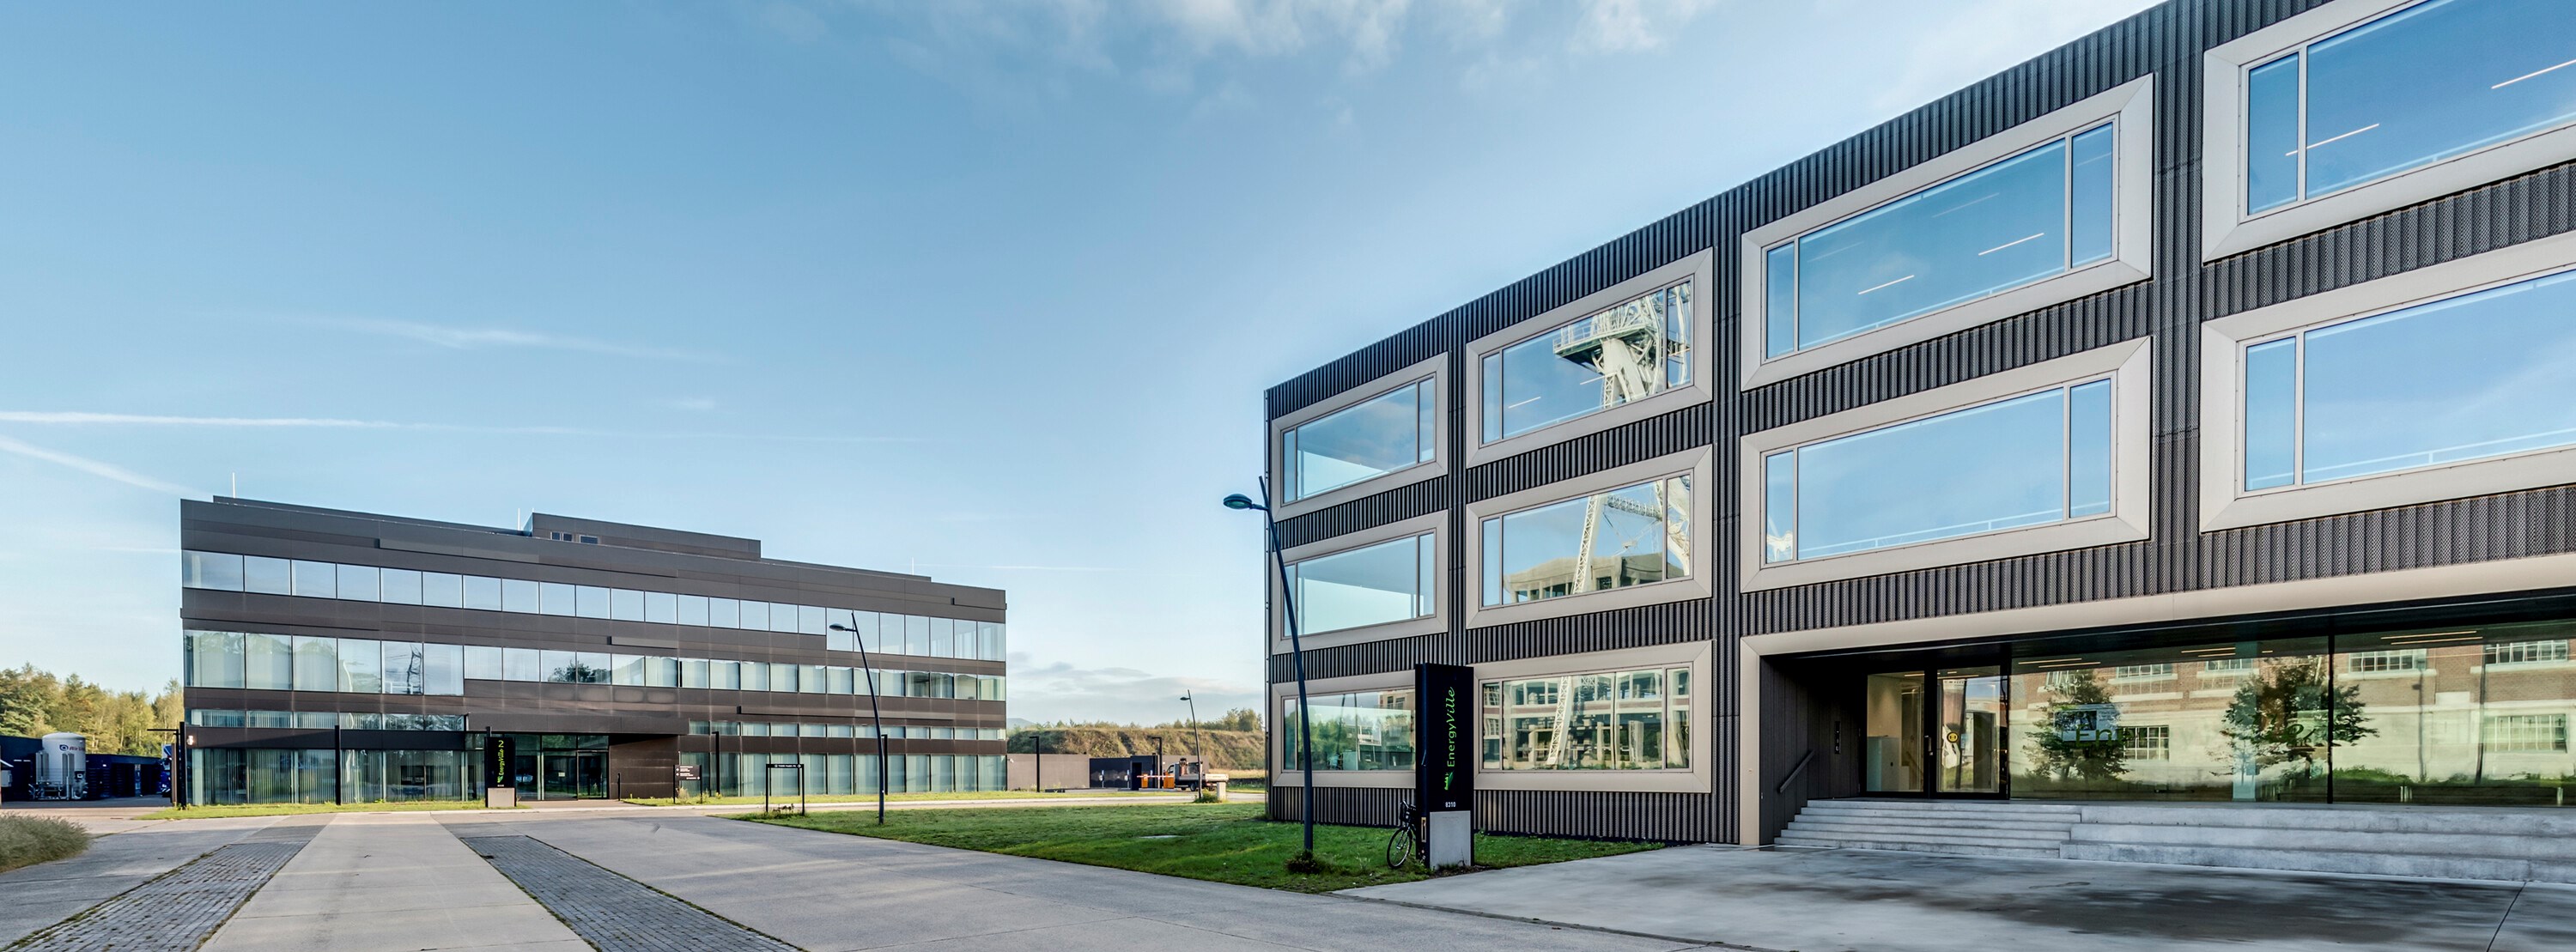 Collaboration with EnergyVille renewed and strengthened